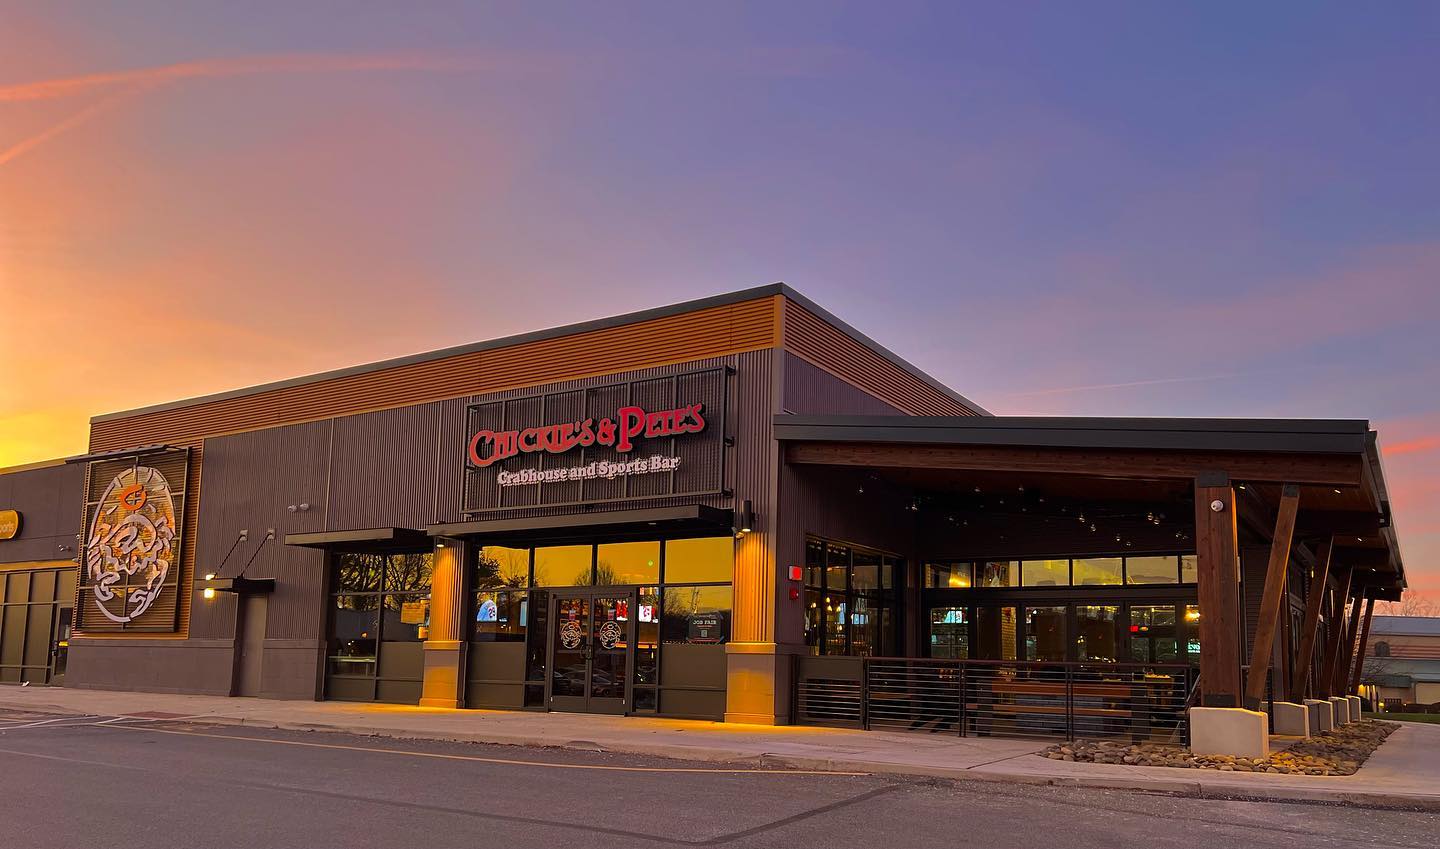 Chickies Petes menu prices featuring 79 items ranging from $1.00 to $81.99